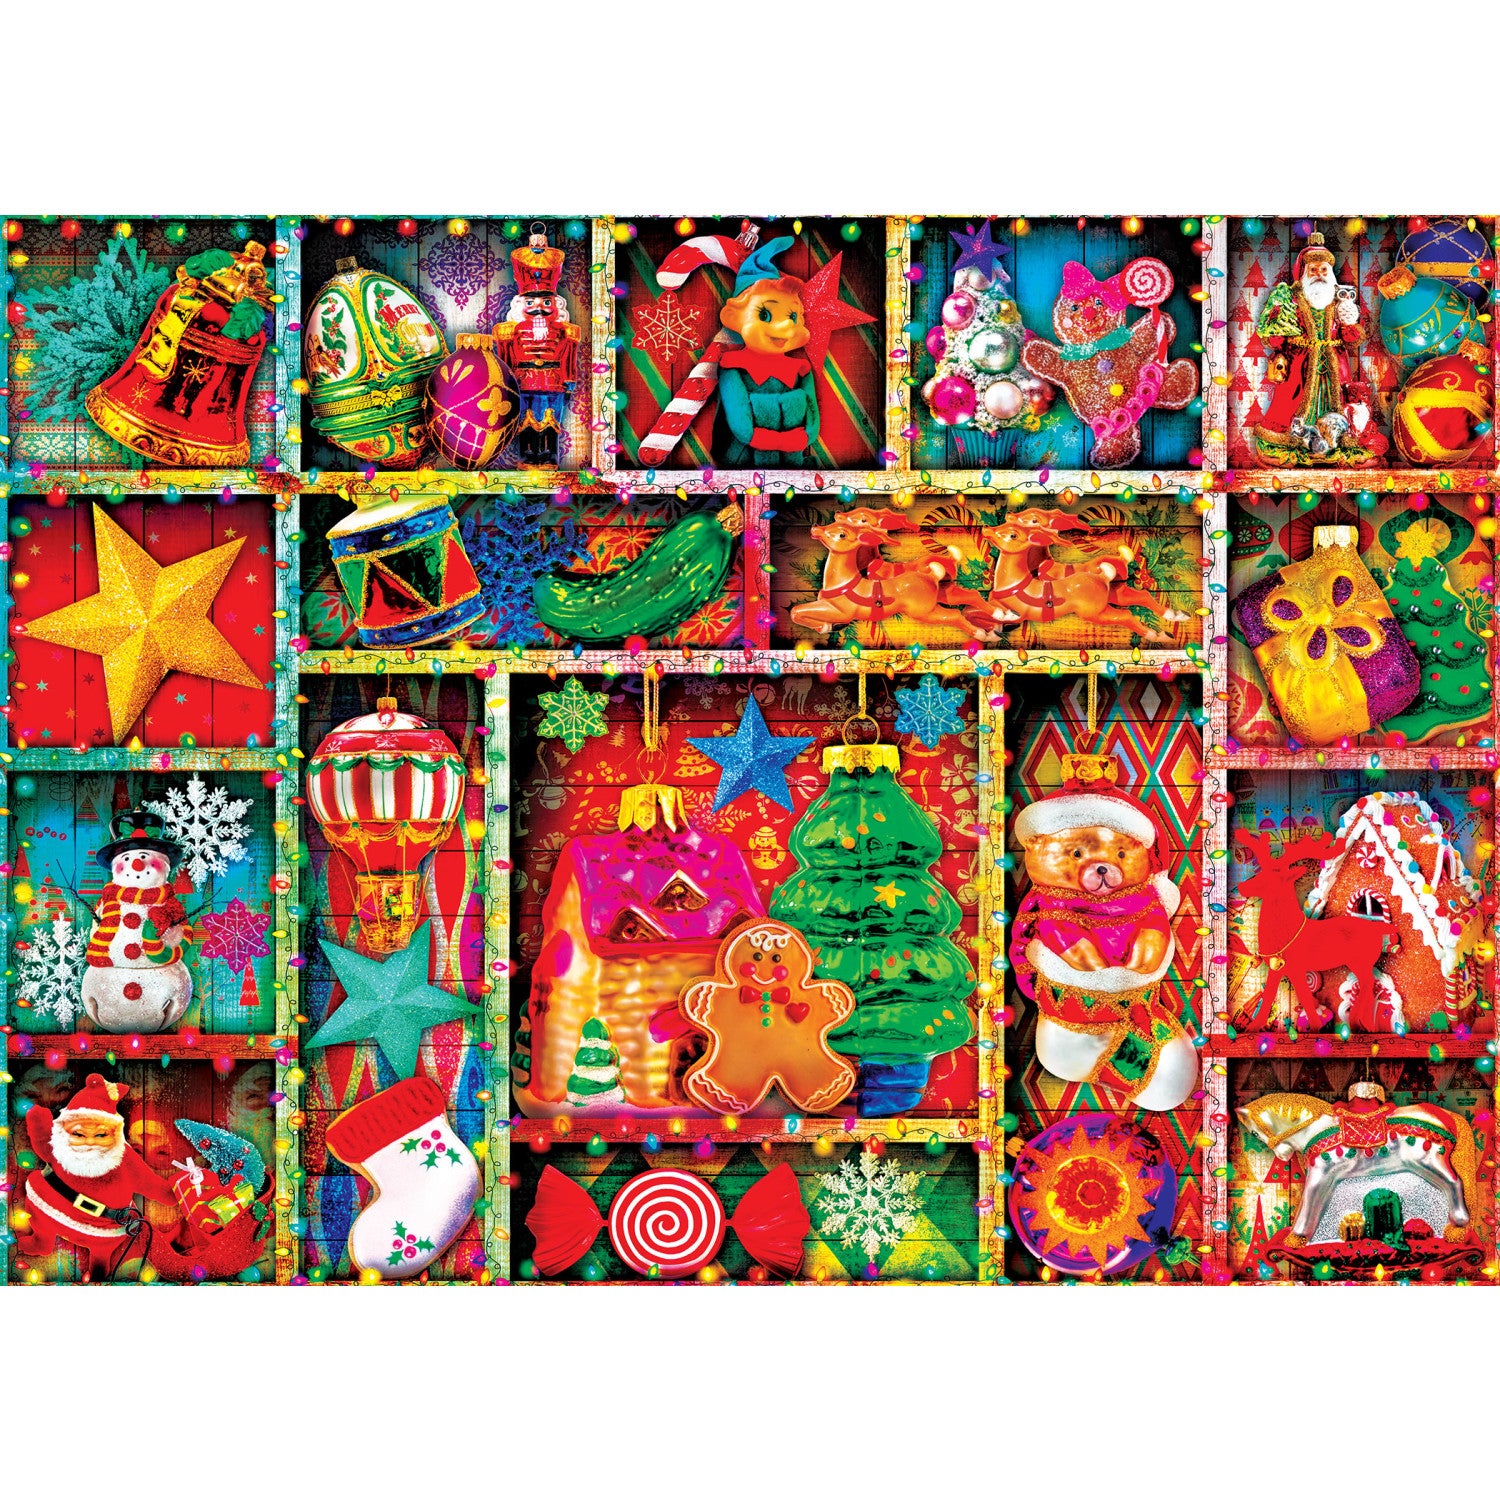 Holiday Glitter - Christmas Ornaments 500 Piece Puzzle